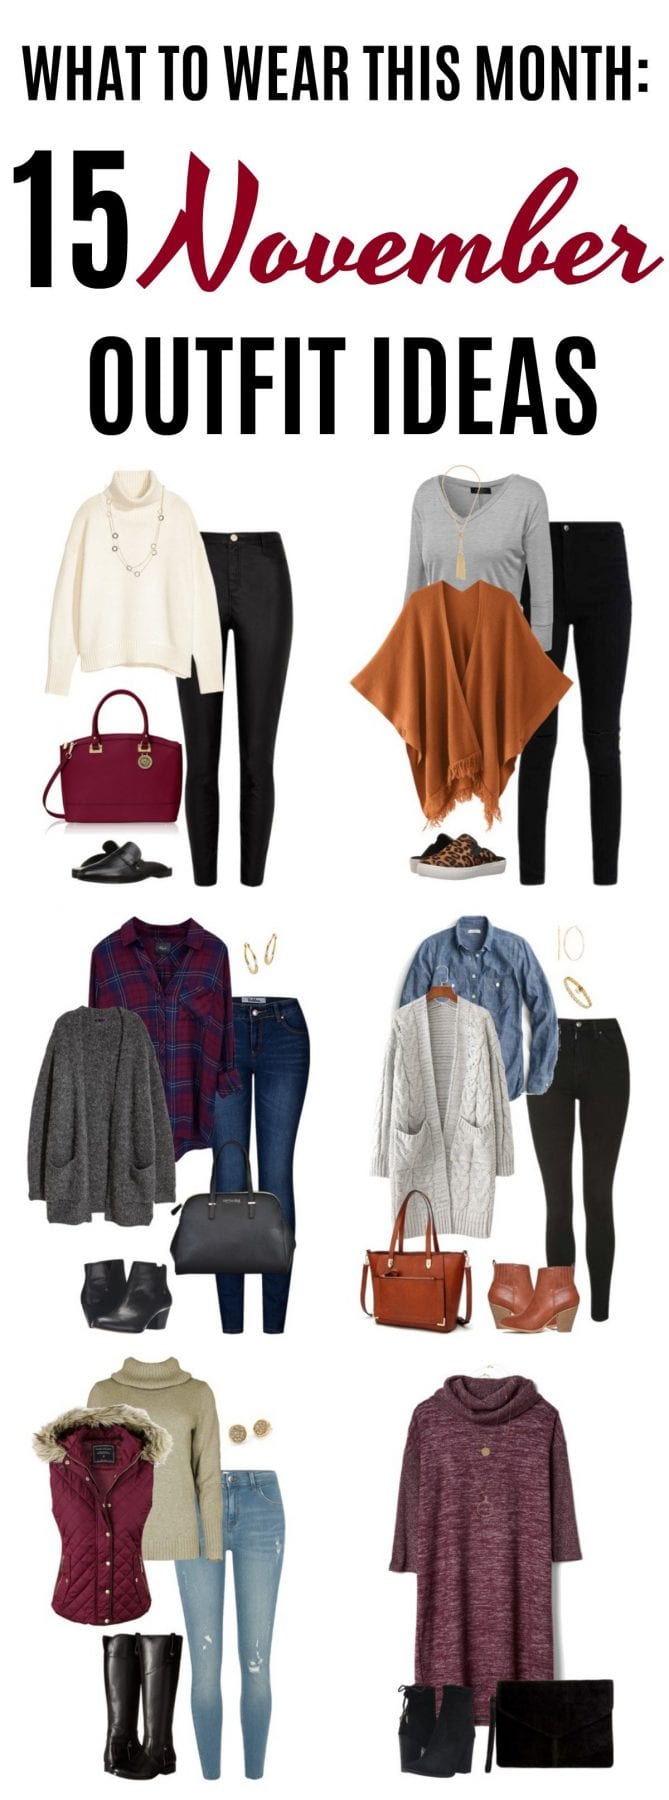 Top 10 november outfits ideas and inspiration